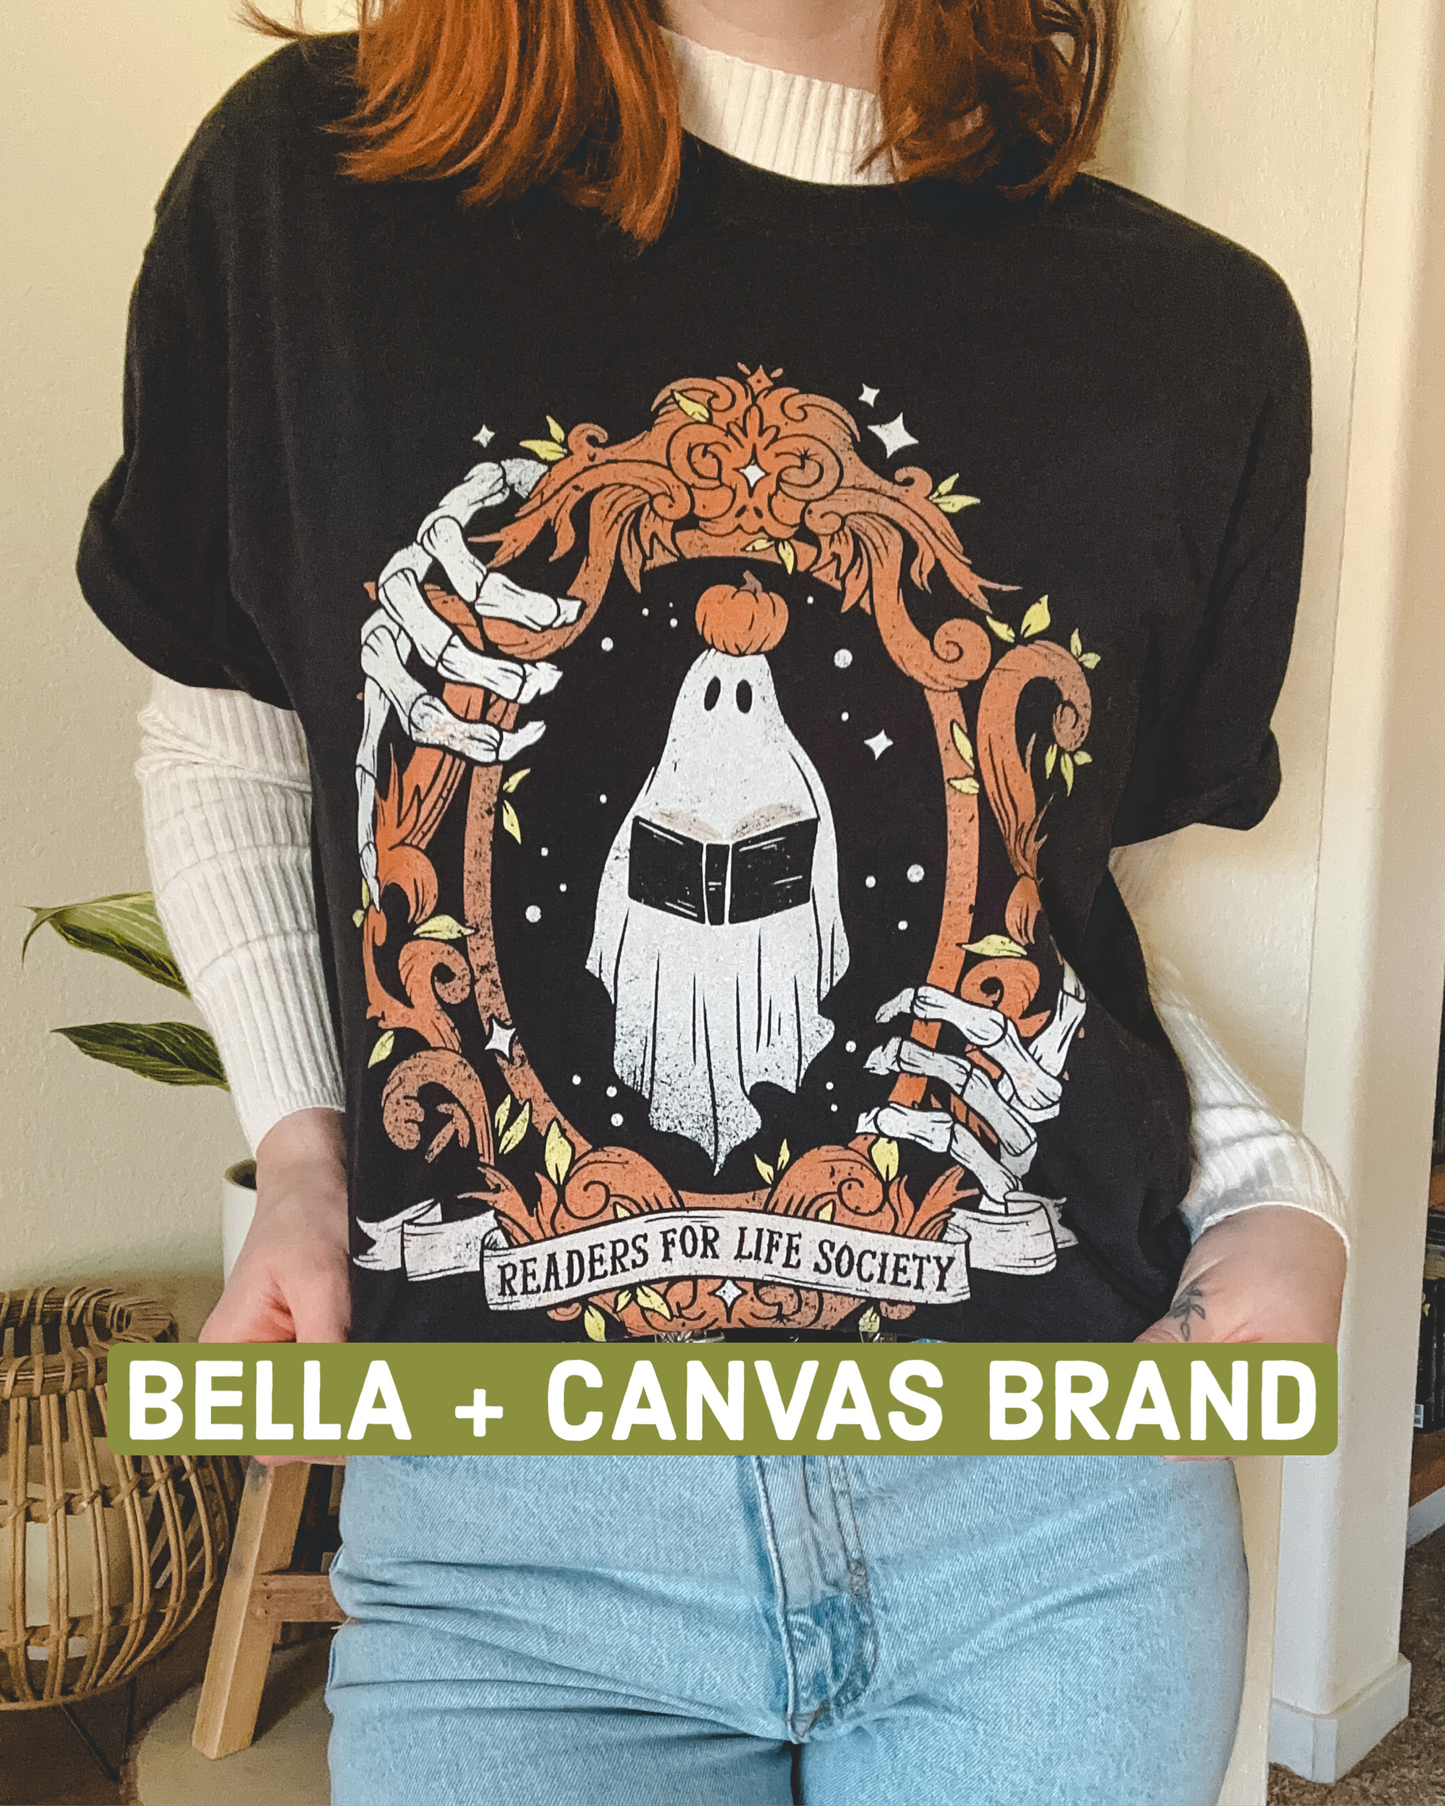 Readers for Life Tee - Black Heather (BELLA + CANVAS BRAND)